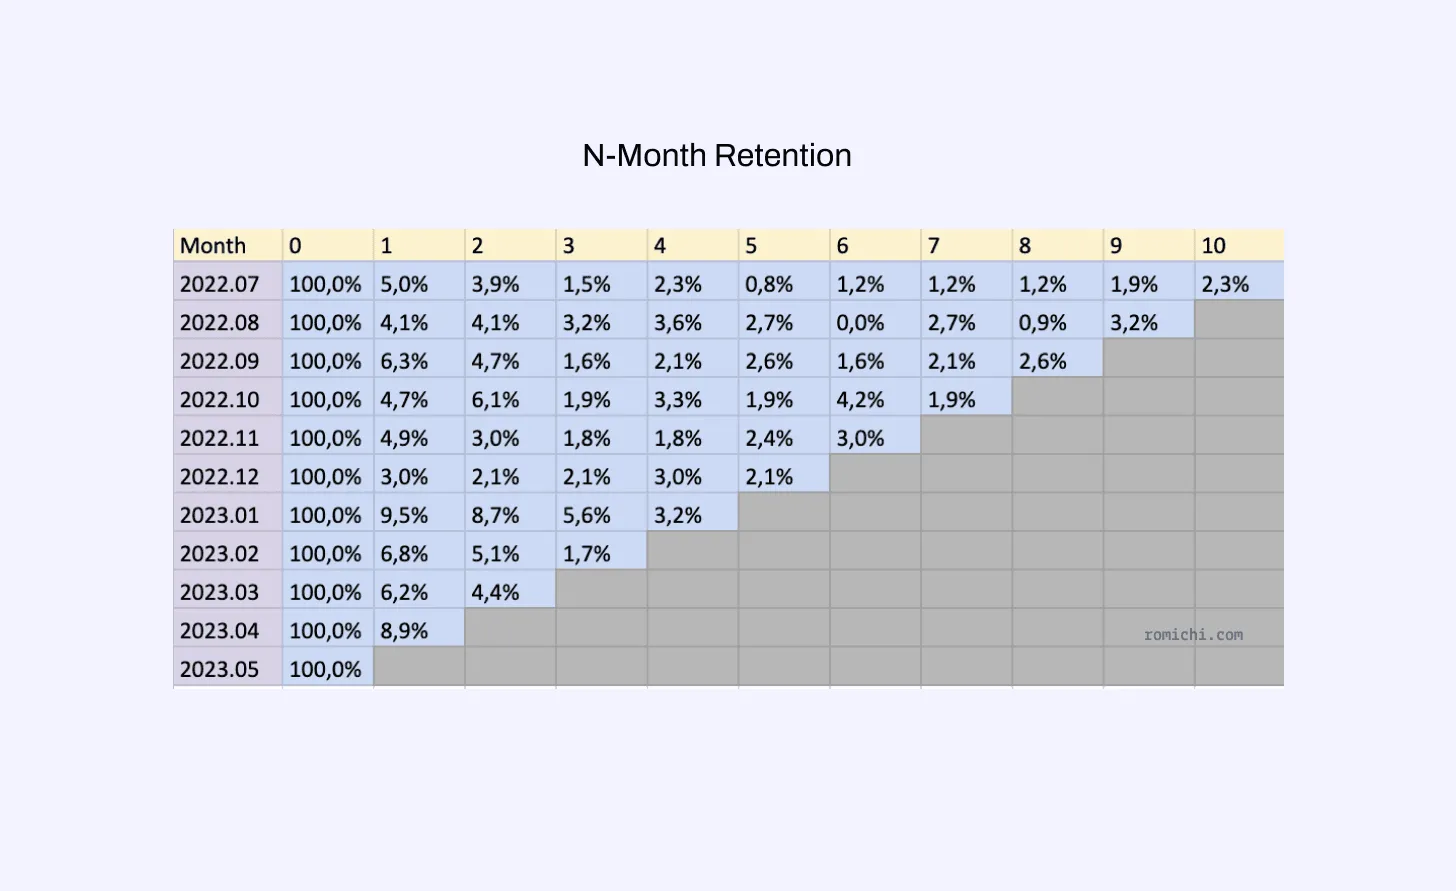 N-Month Retention Rate Cohorts